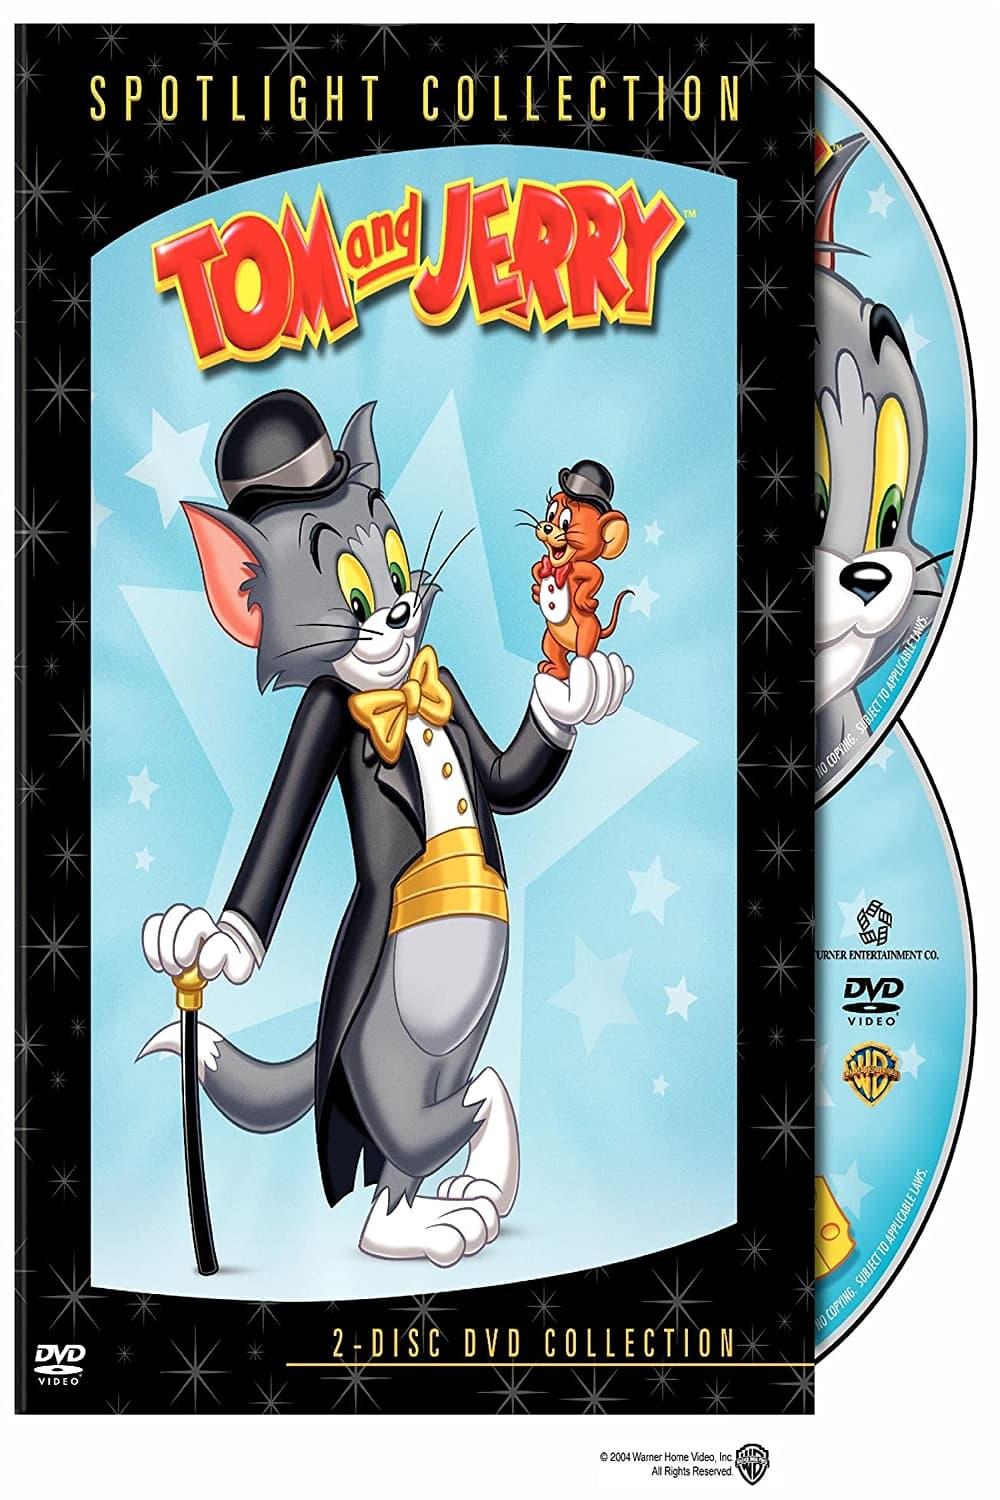 Tom and Jerry: Spotlight Collection Vol. 1 poster